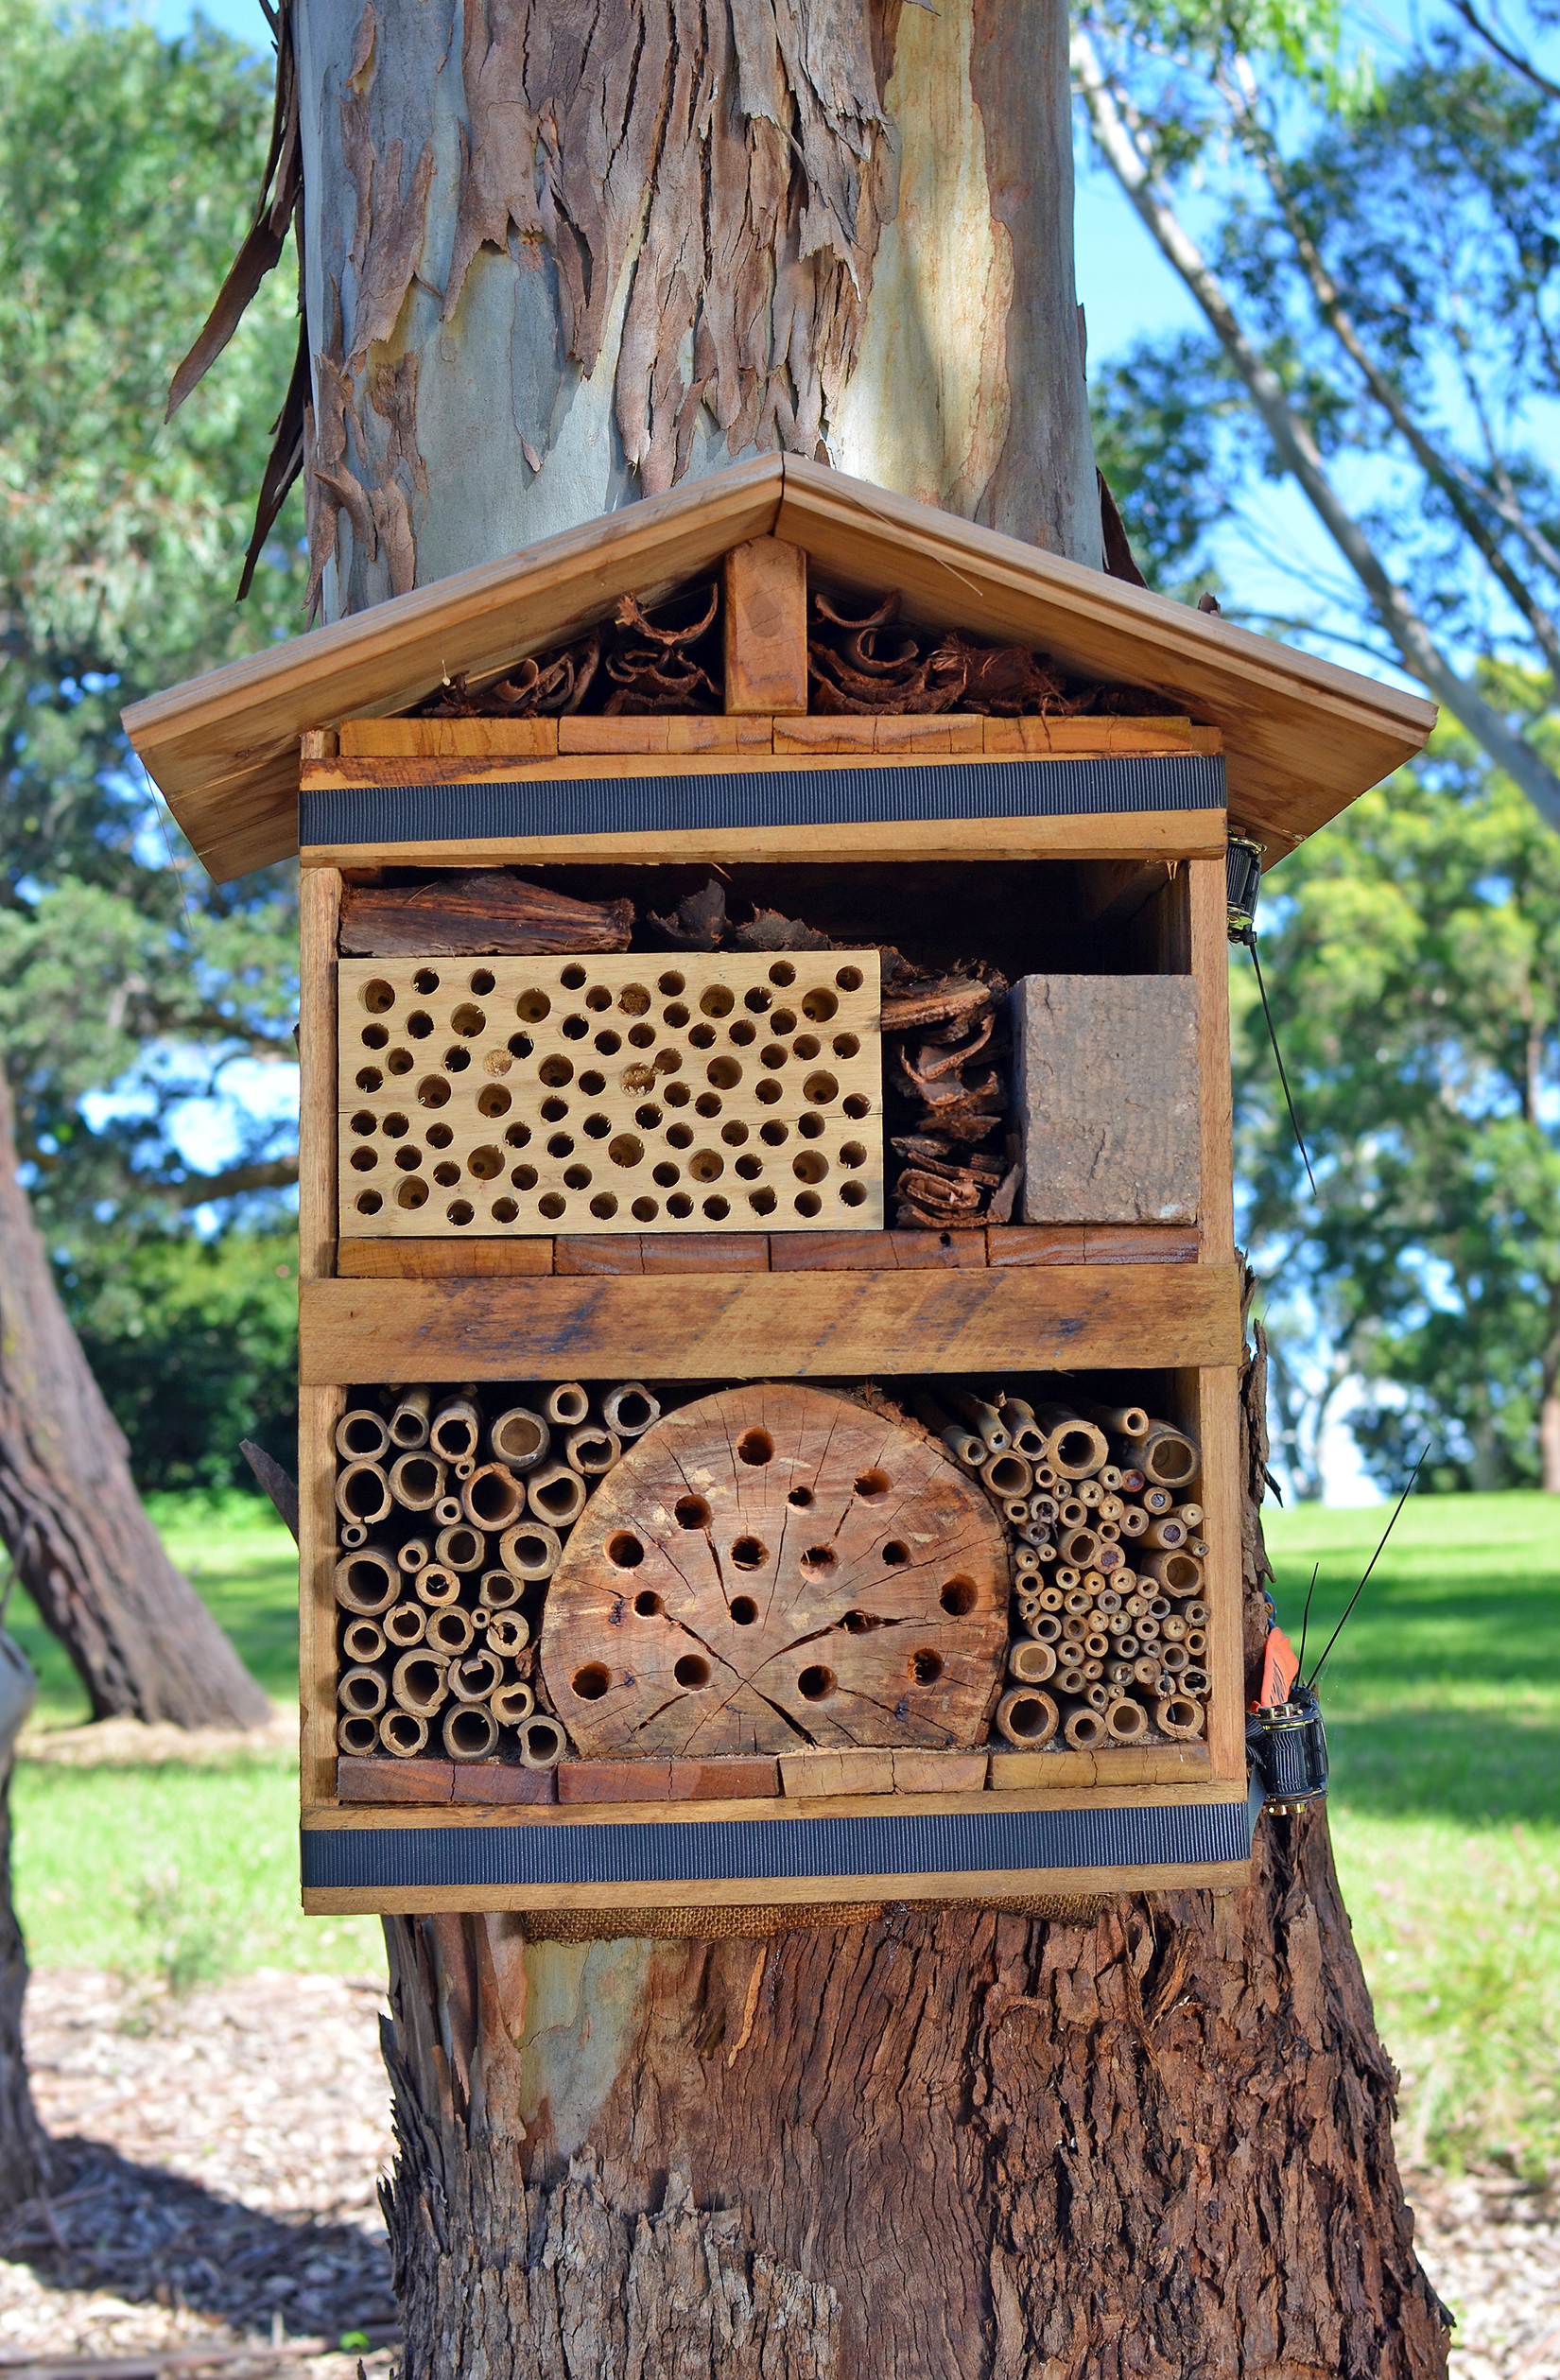 Bee hotel strapped to a tree in Australian parkland. Nesting area built from timber and natural materials to attract solitary native bees to Australian suburban gardens.